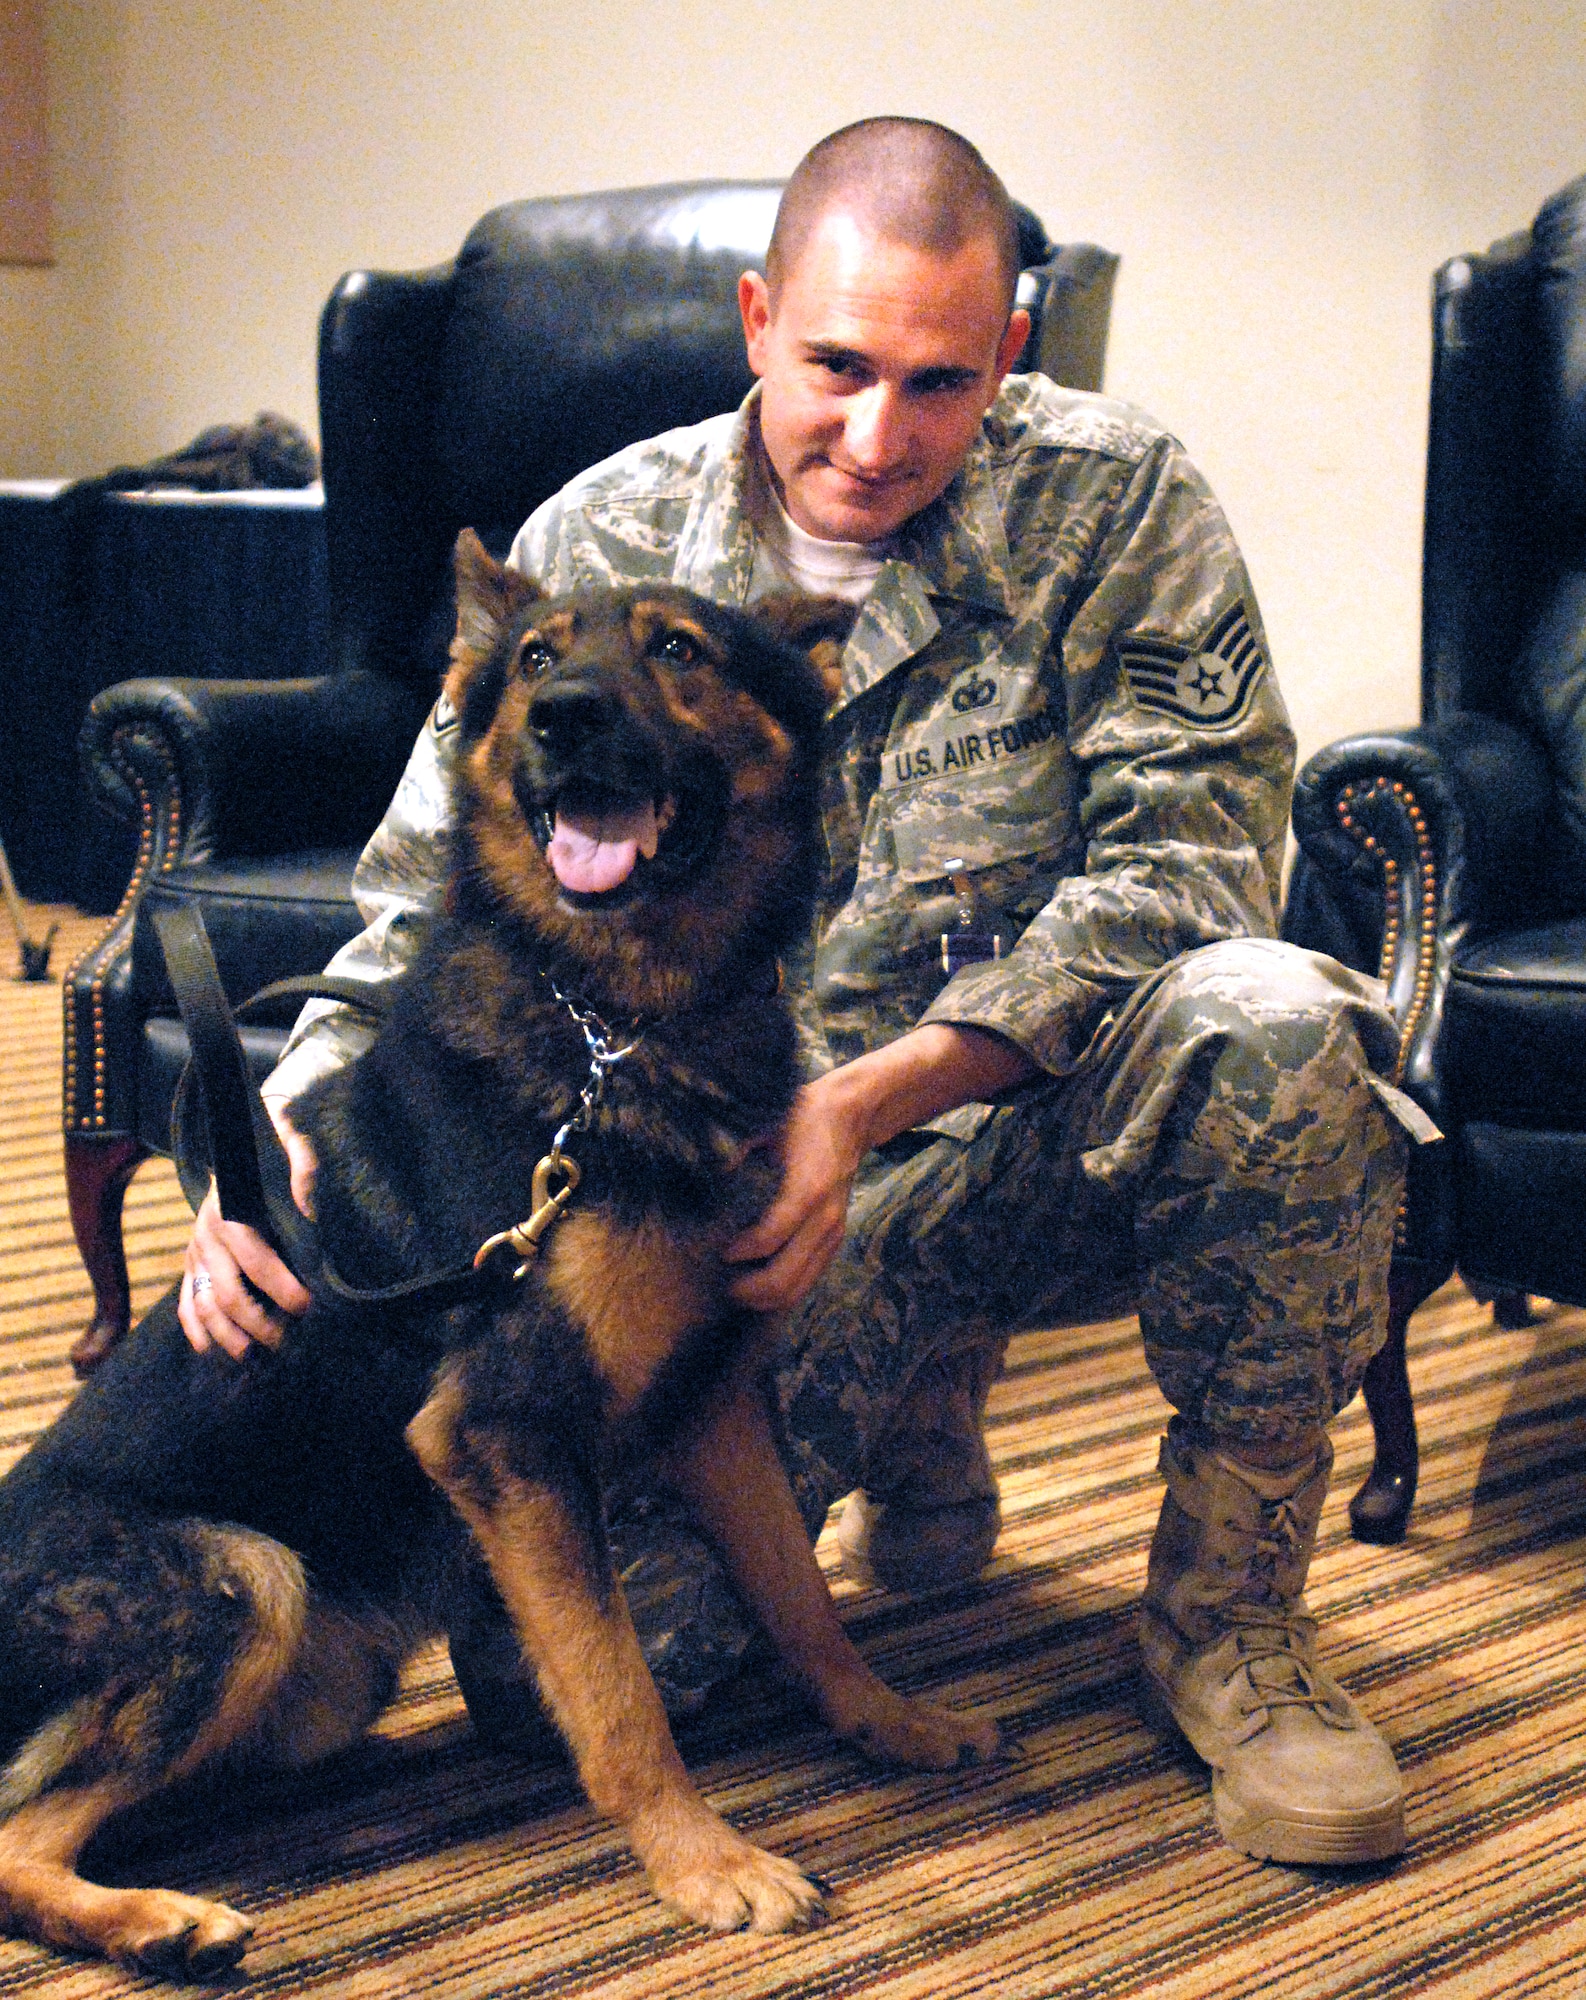 Staff Sgt. Dustin Vigil, 17th Security Forces Squadron K-9 handler, and his former military working dog, Spidla, after Sergeant Vigil's Purple Heart ceremony Sept. 17 at the Event Center. (U.S. Air Force photo/Master Sgt. Randy Mallard)